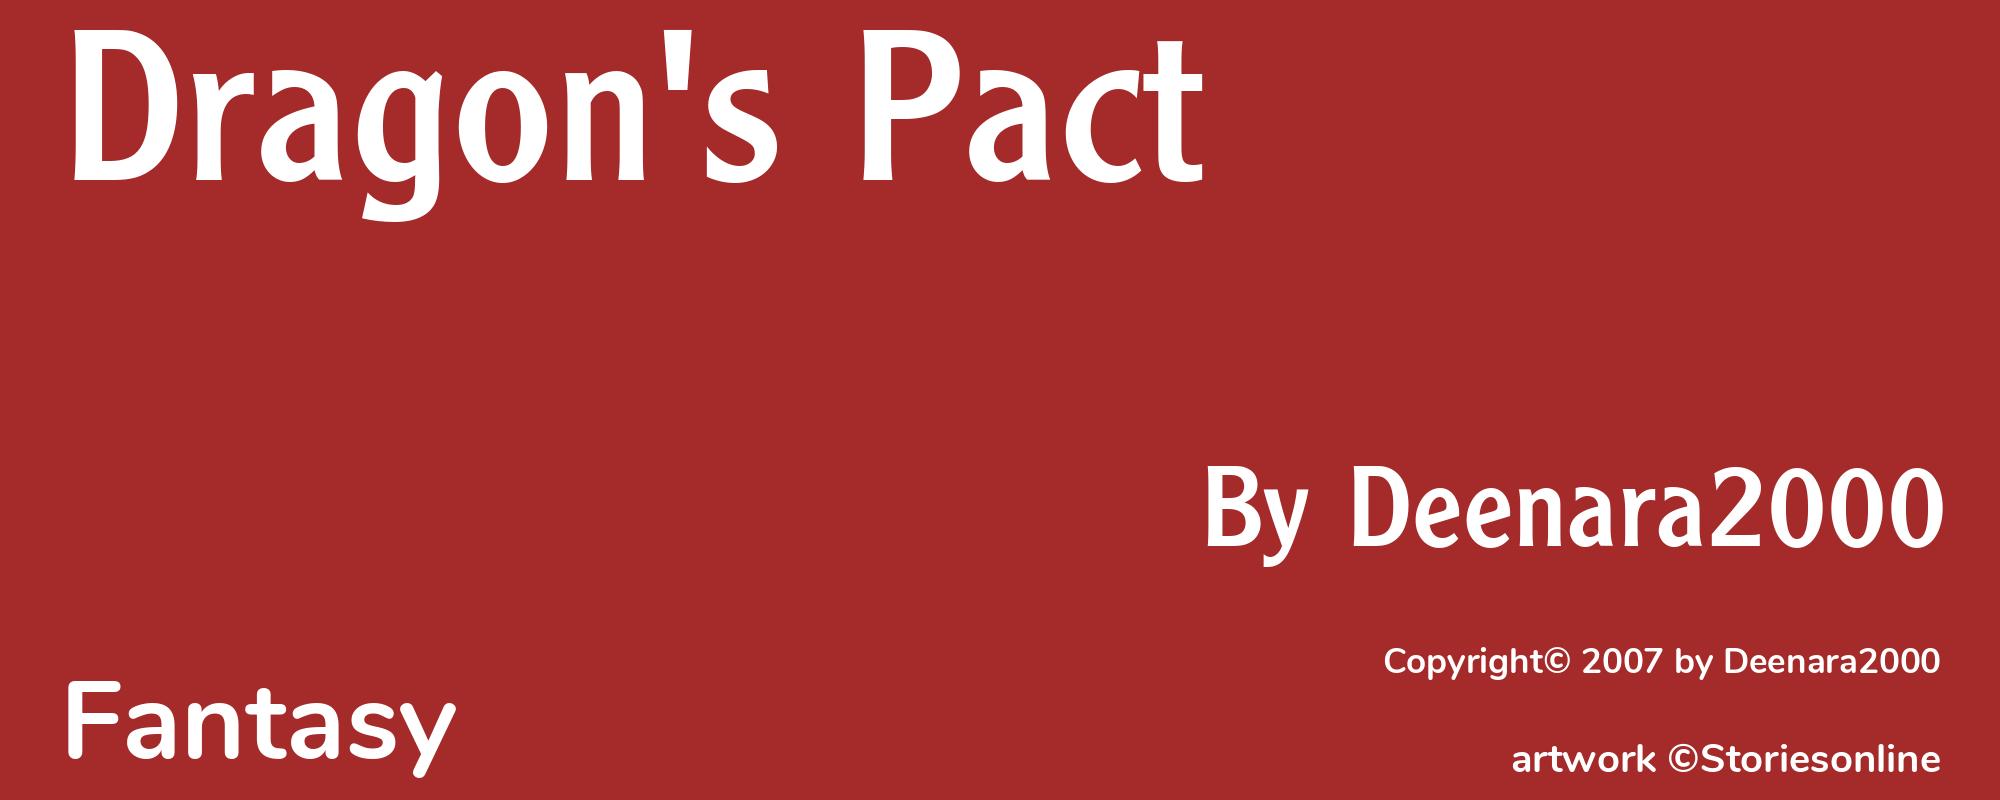 Dragon's Pact - Cover